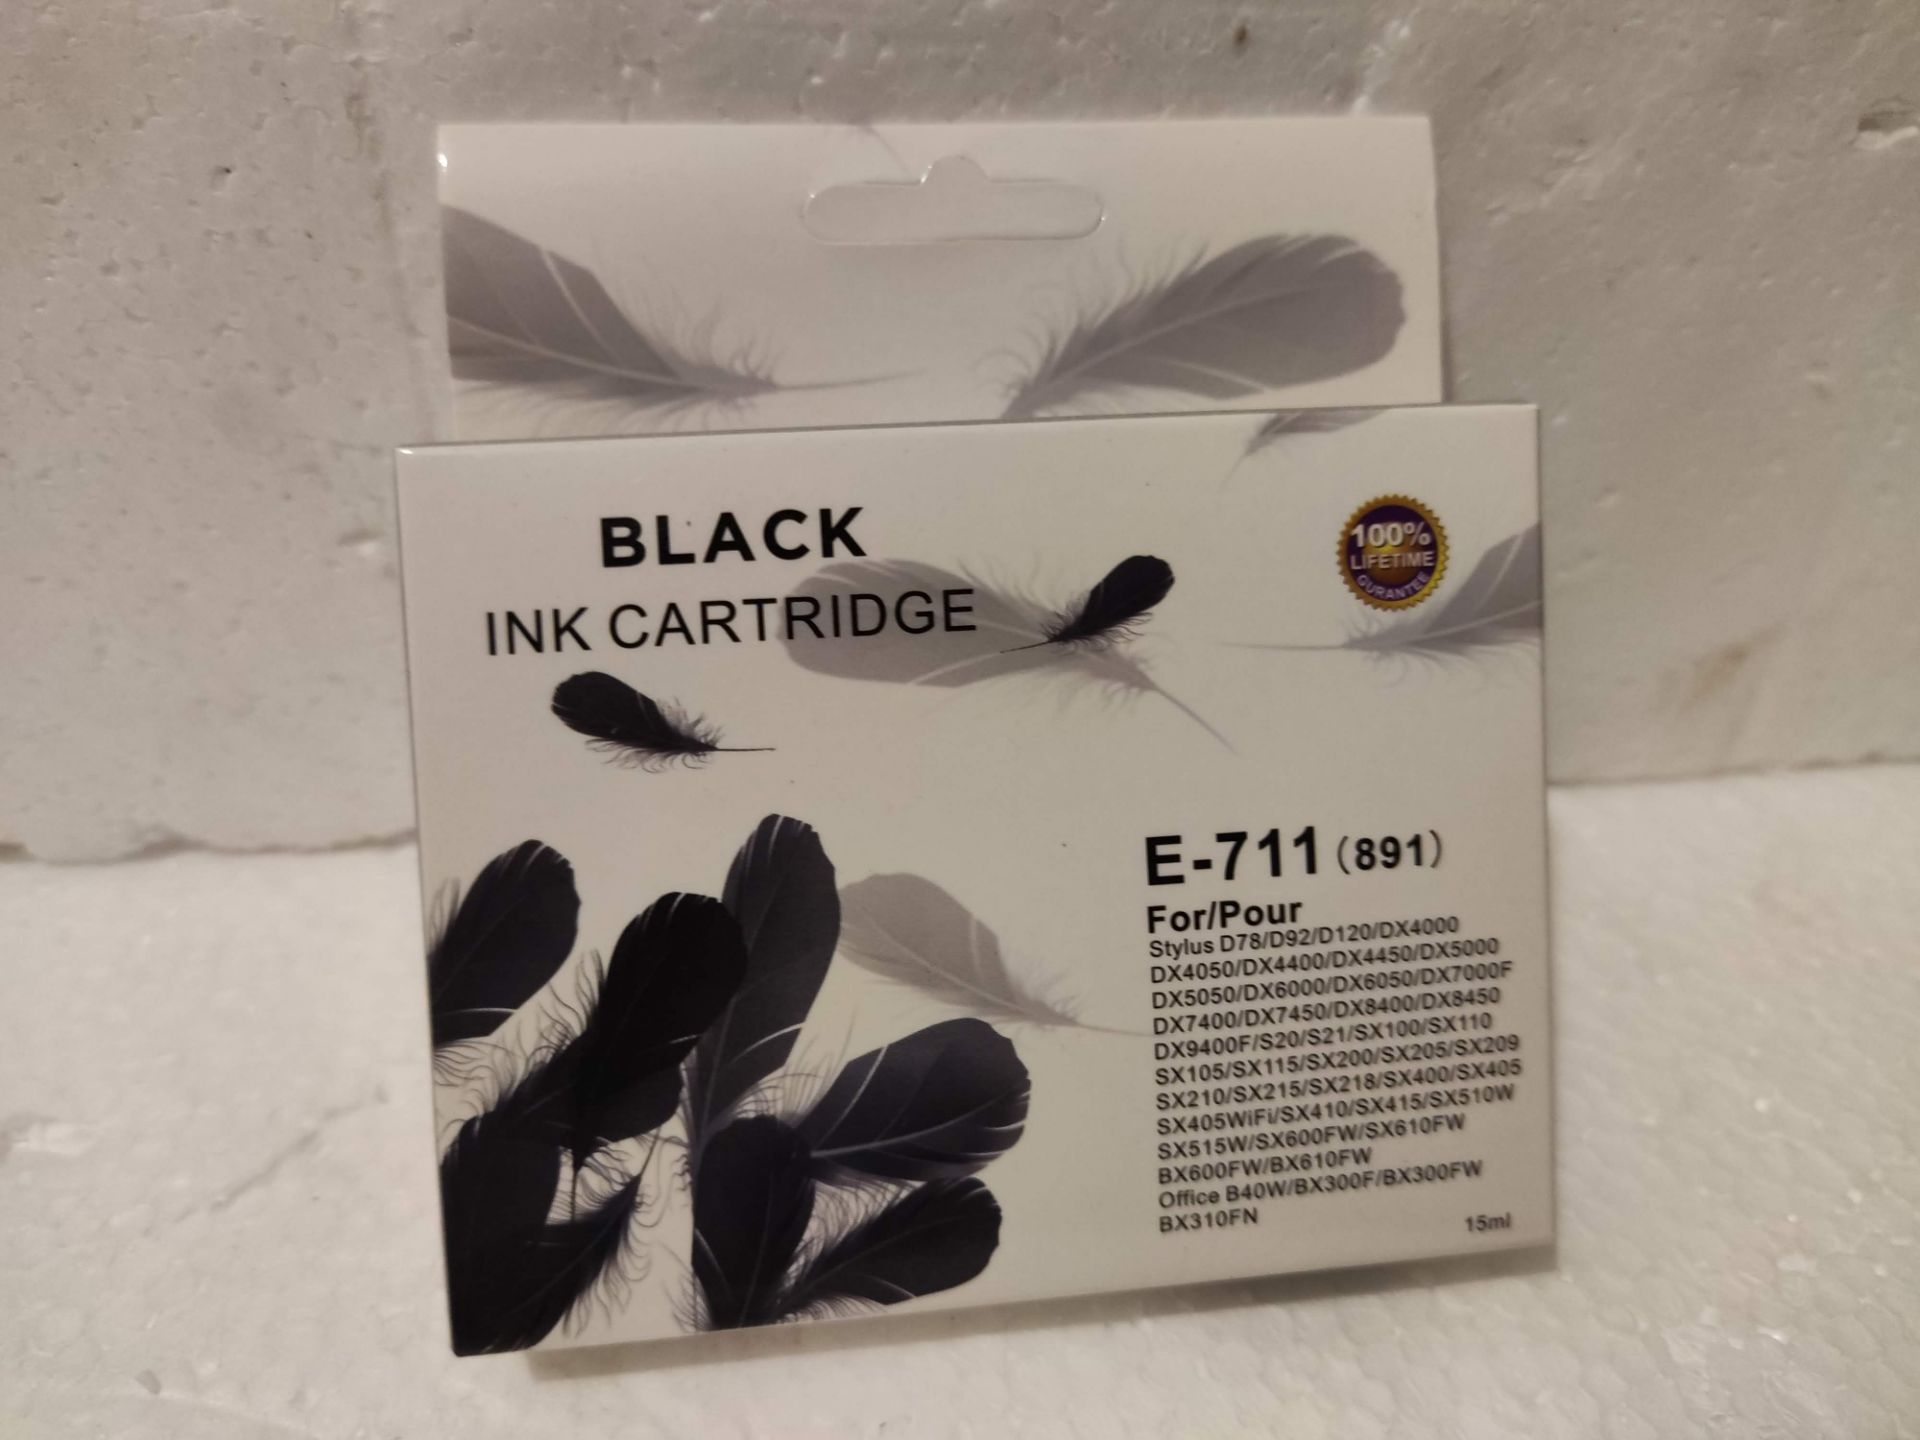 4 Packs of E-711 (891) Ink Cartridge Replacement for Epson T0711 Black.